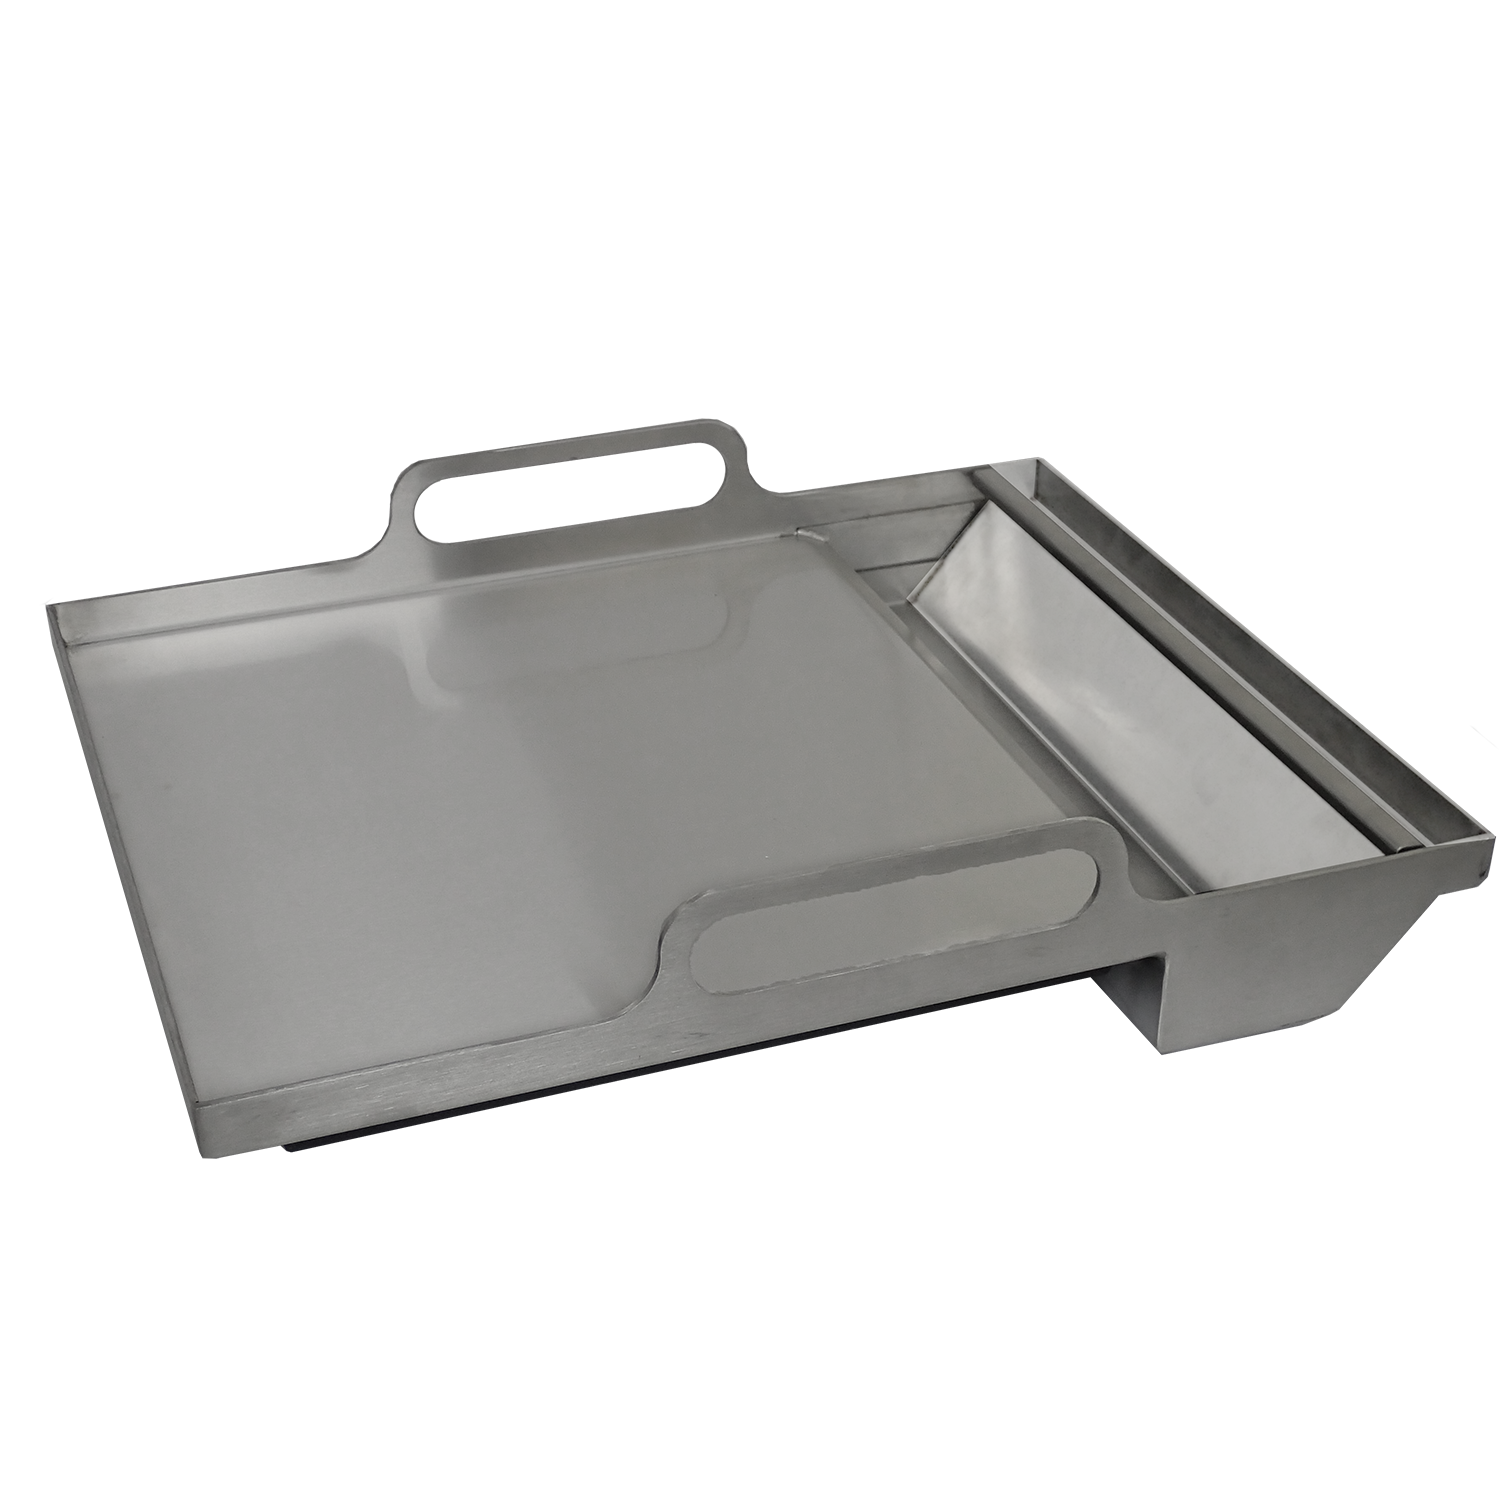 Dual Plate SS Griddle – by Le Griddle for Cutlass Pro Series Grills (RON) 14 1/4" x 19 3/4"